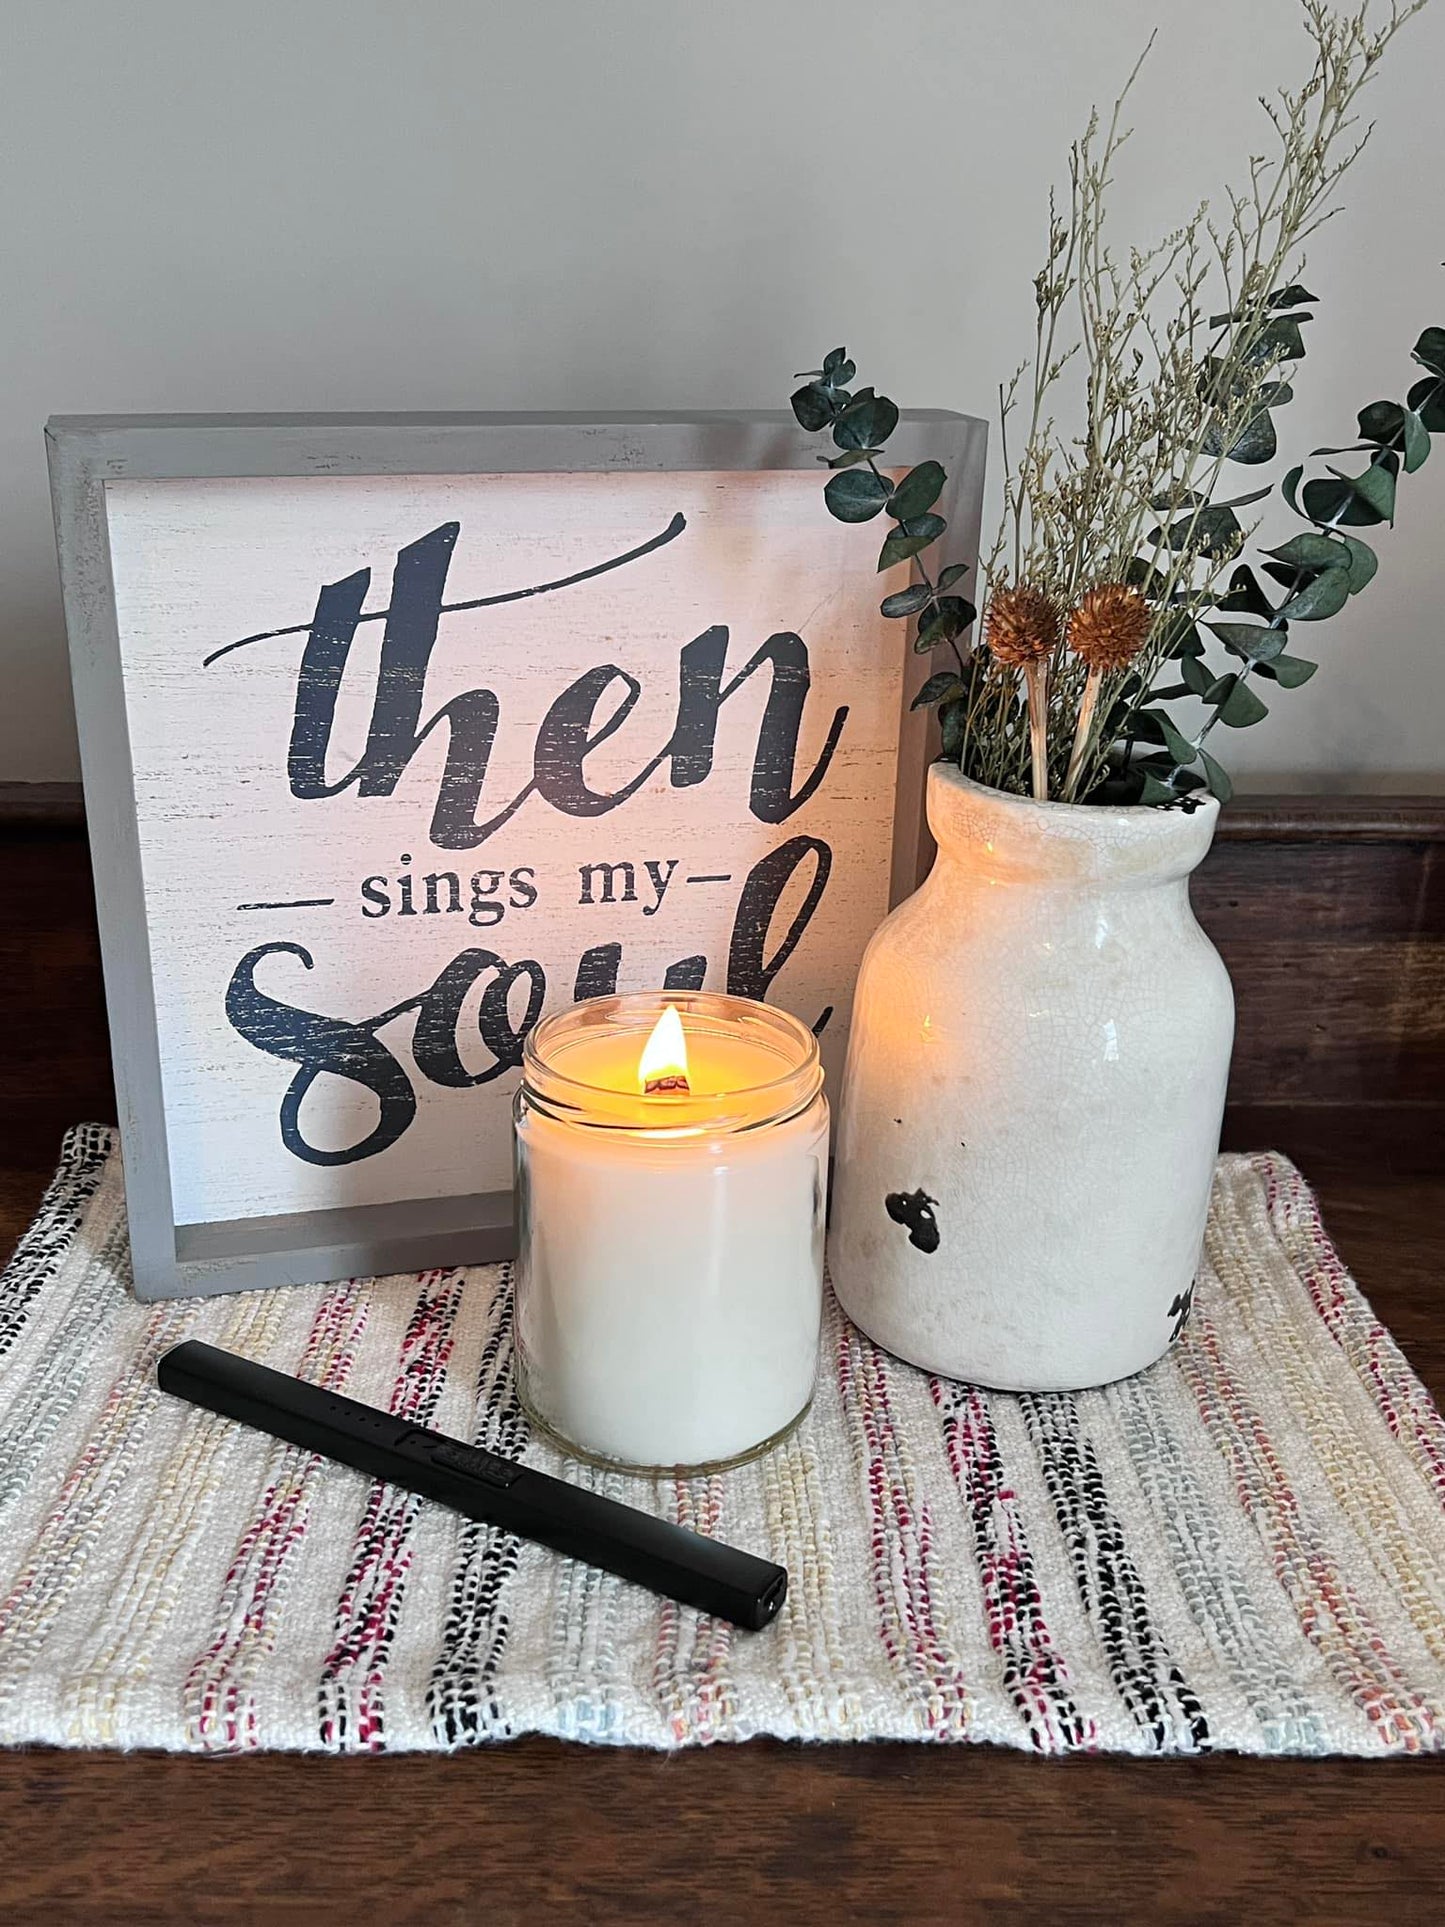 In the Valley Coconut Soy Wax Scented Candle